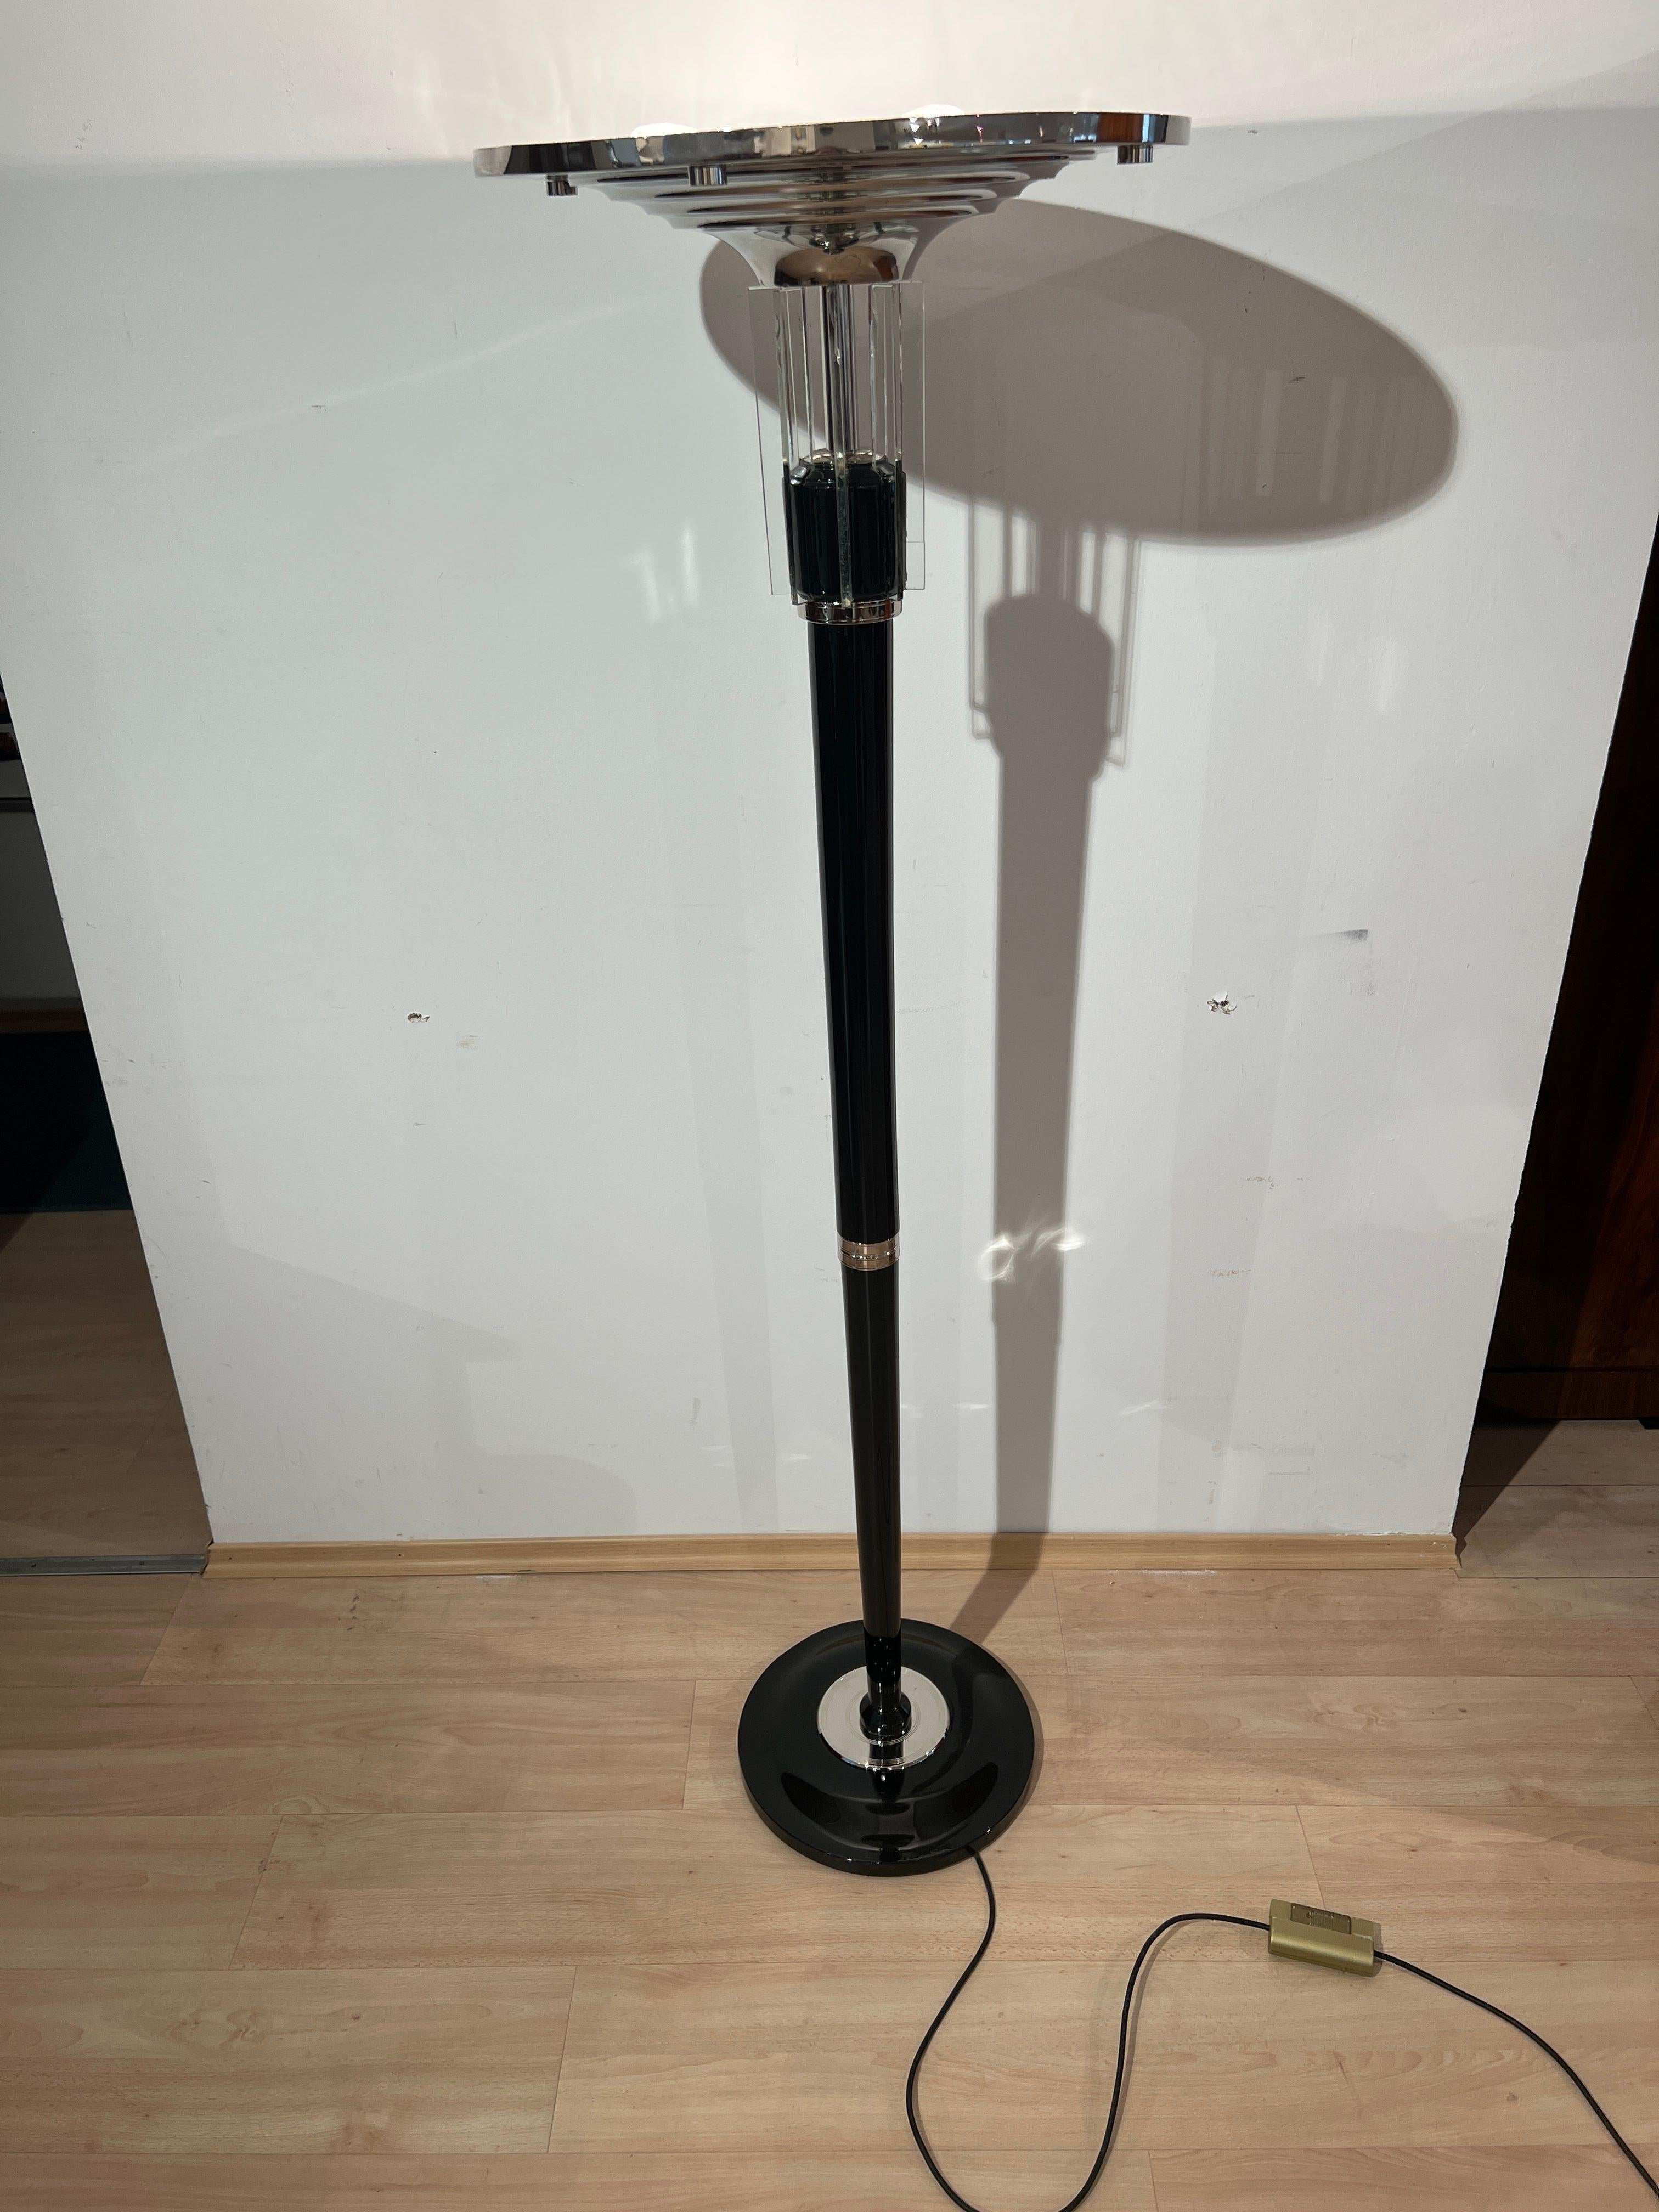 Lacquered Art Deco Floor Lamp, Black Lacquer, Nickel and Glass, France circa 1930